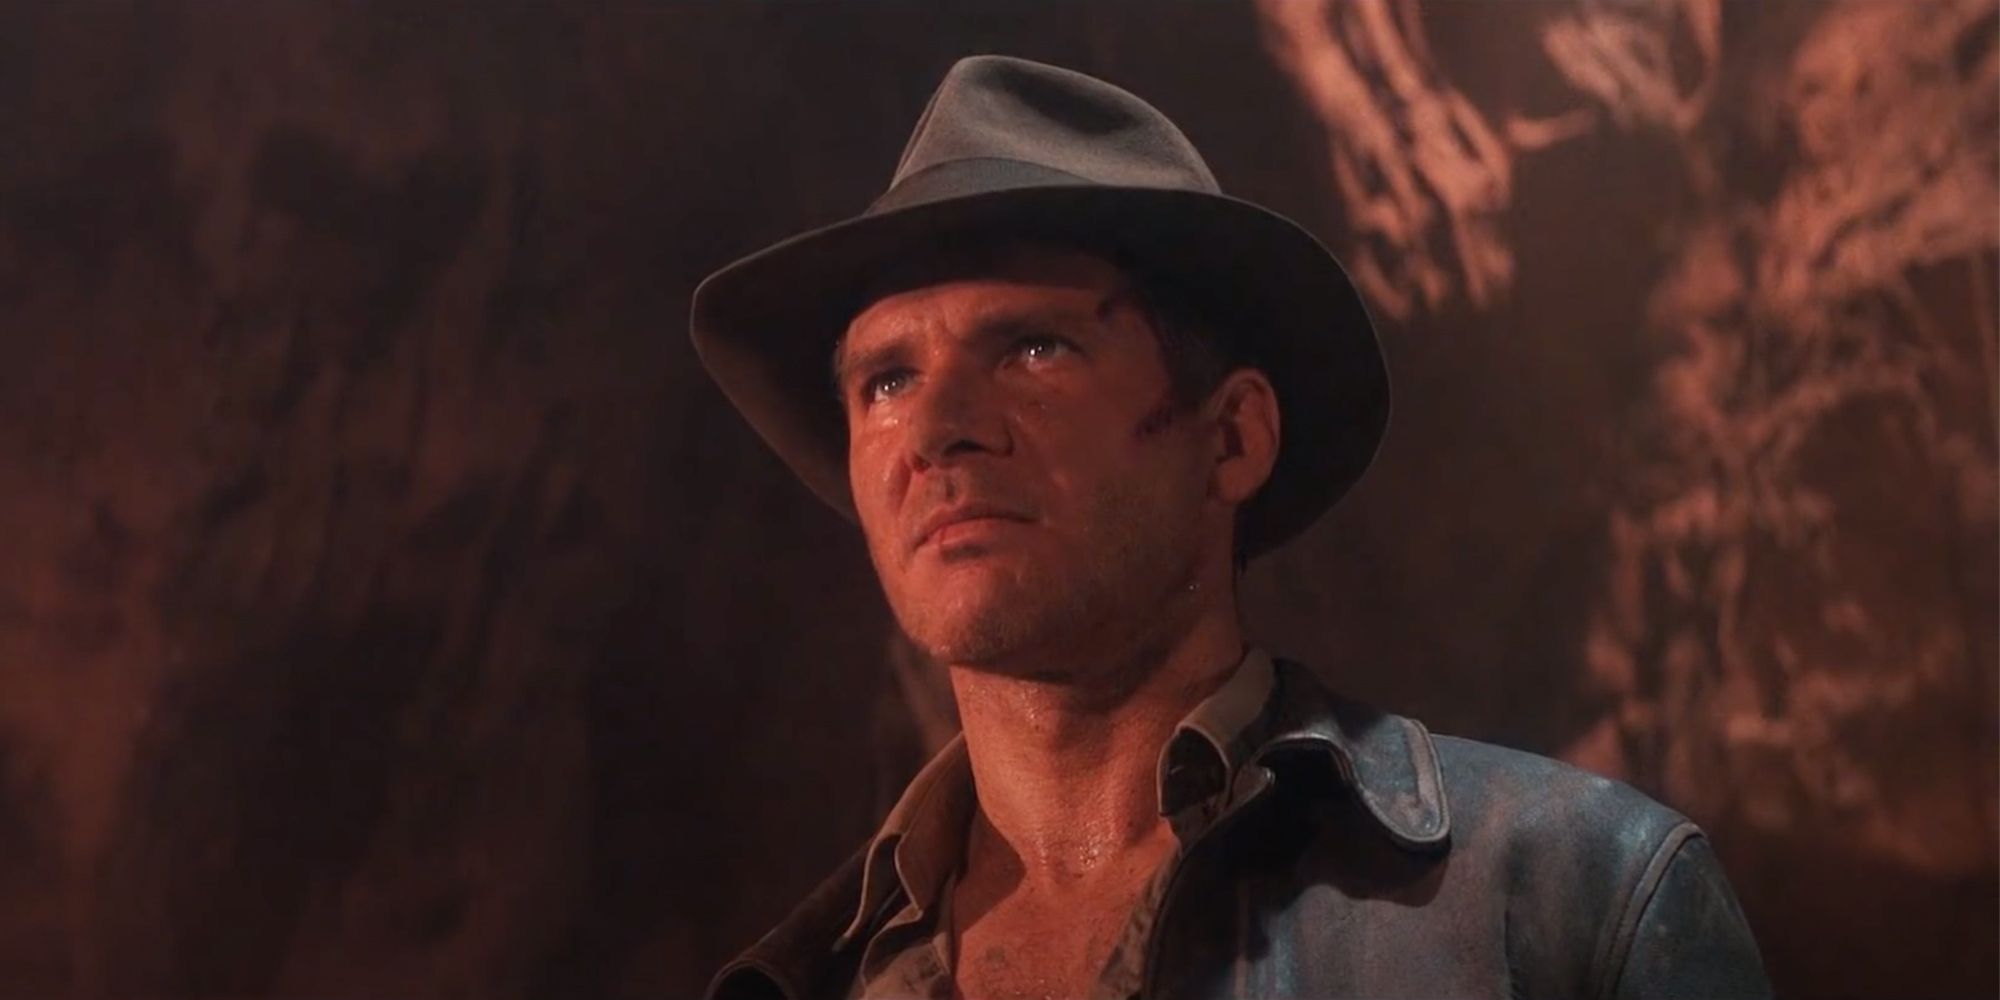 Indiana Jones enters the Grail temple in The Last Crusade